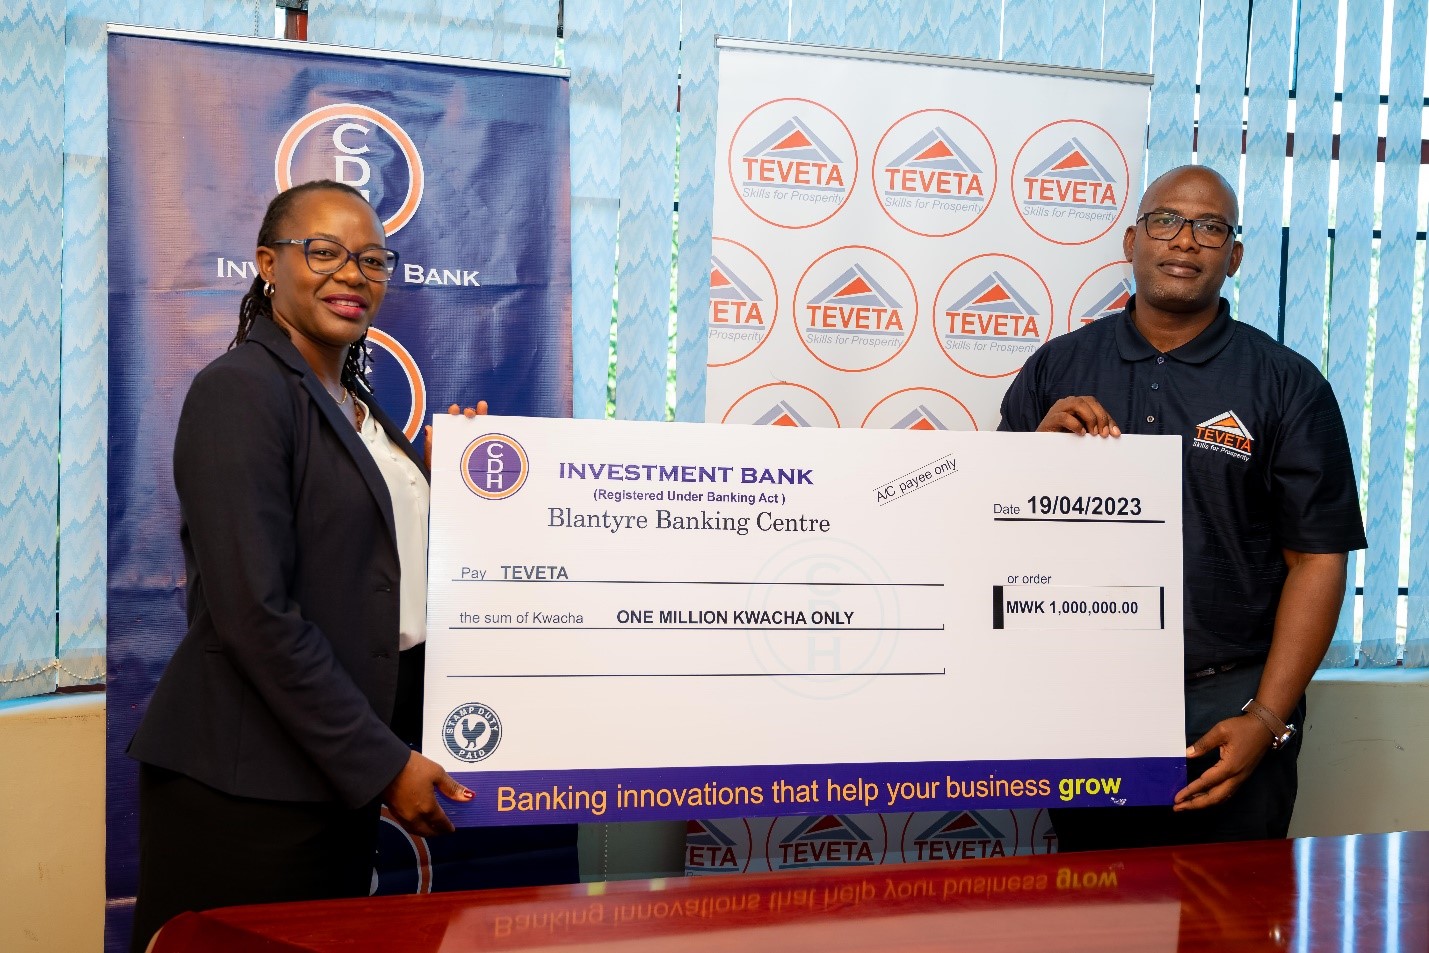 CDH Investment Bank supports the 2023 national TEVET conference